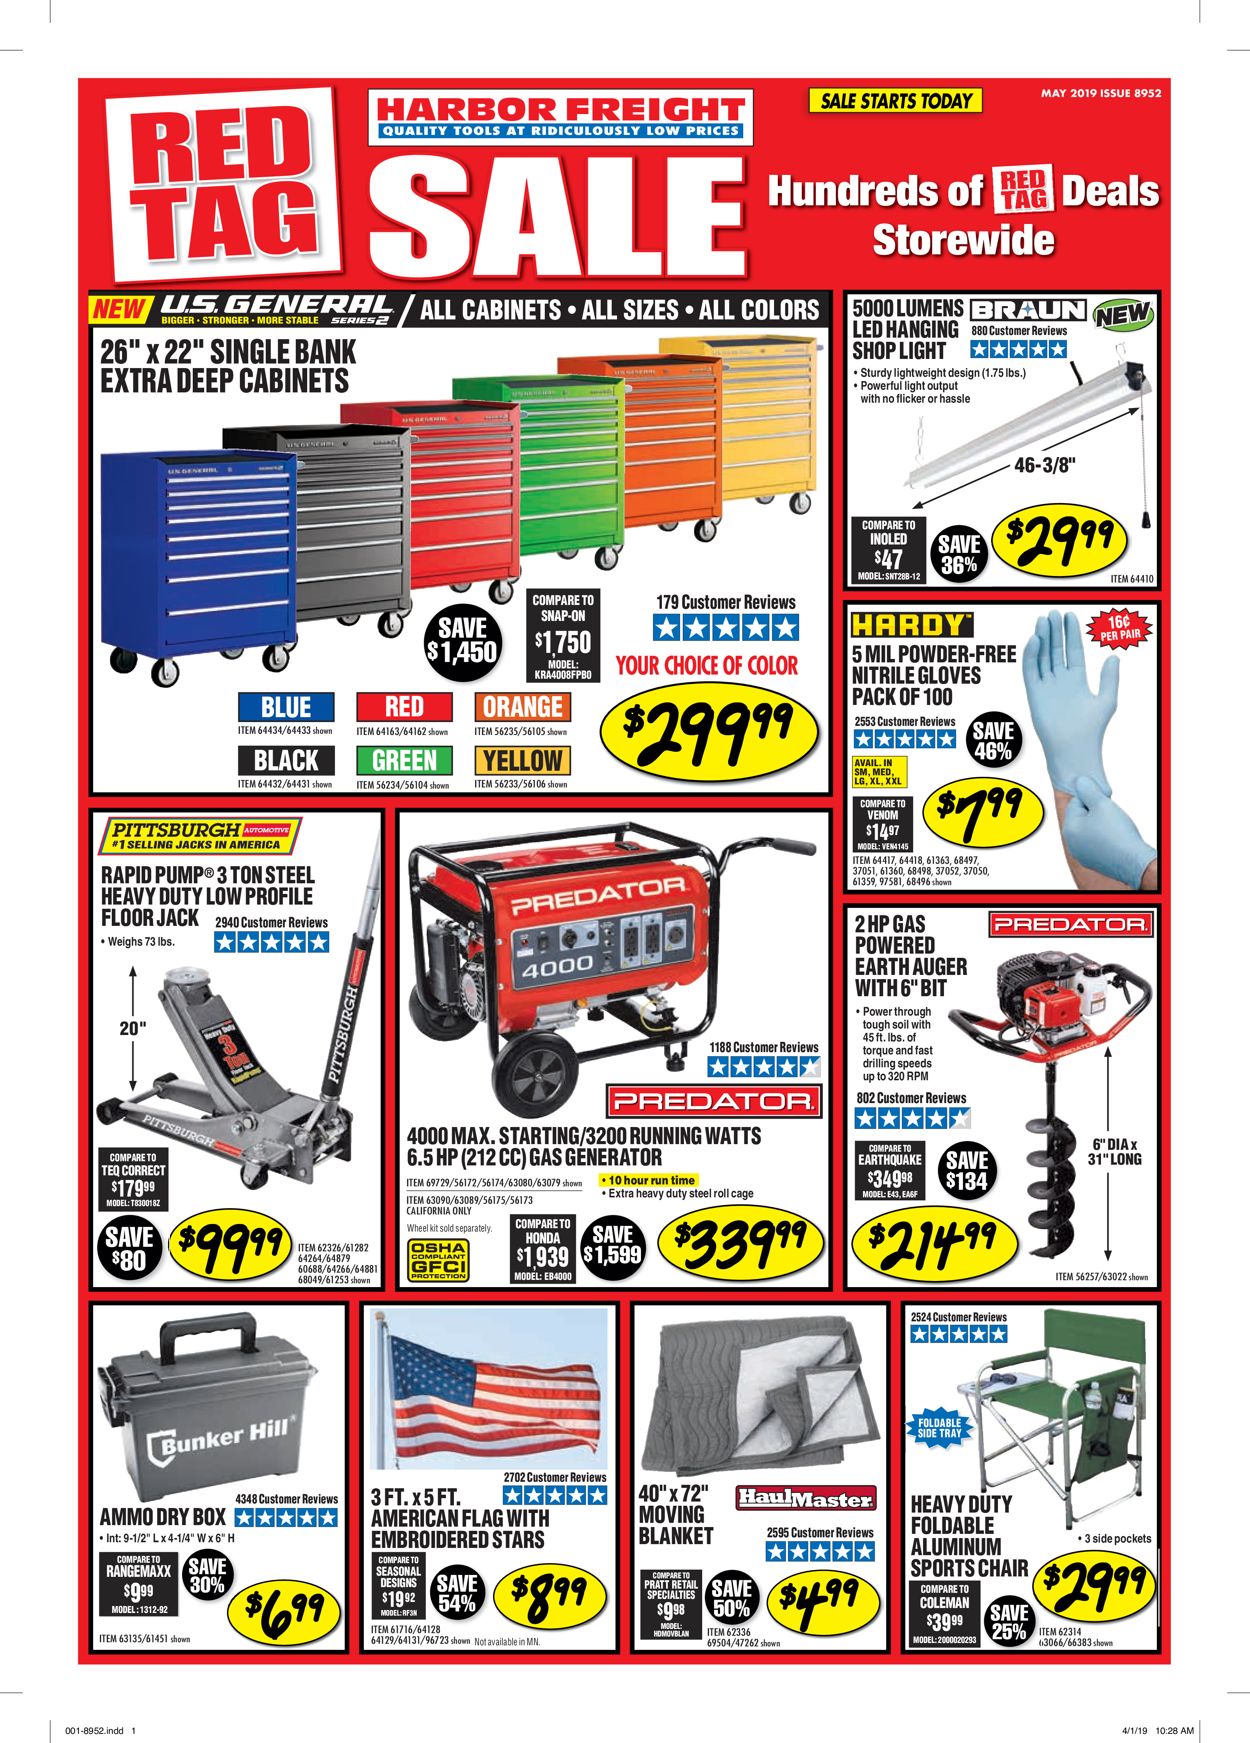 Harbor Freight Current weekly ad 05/01 05/31/2019